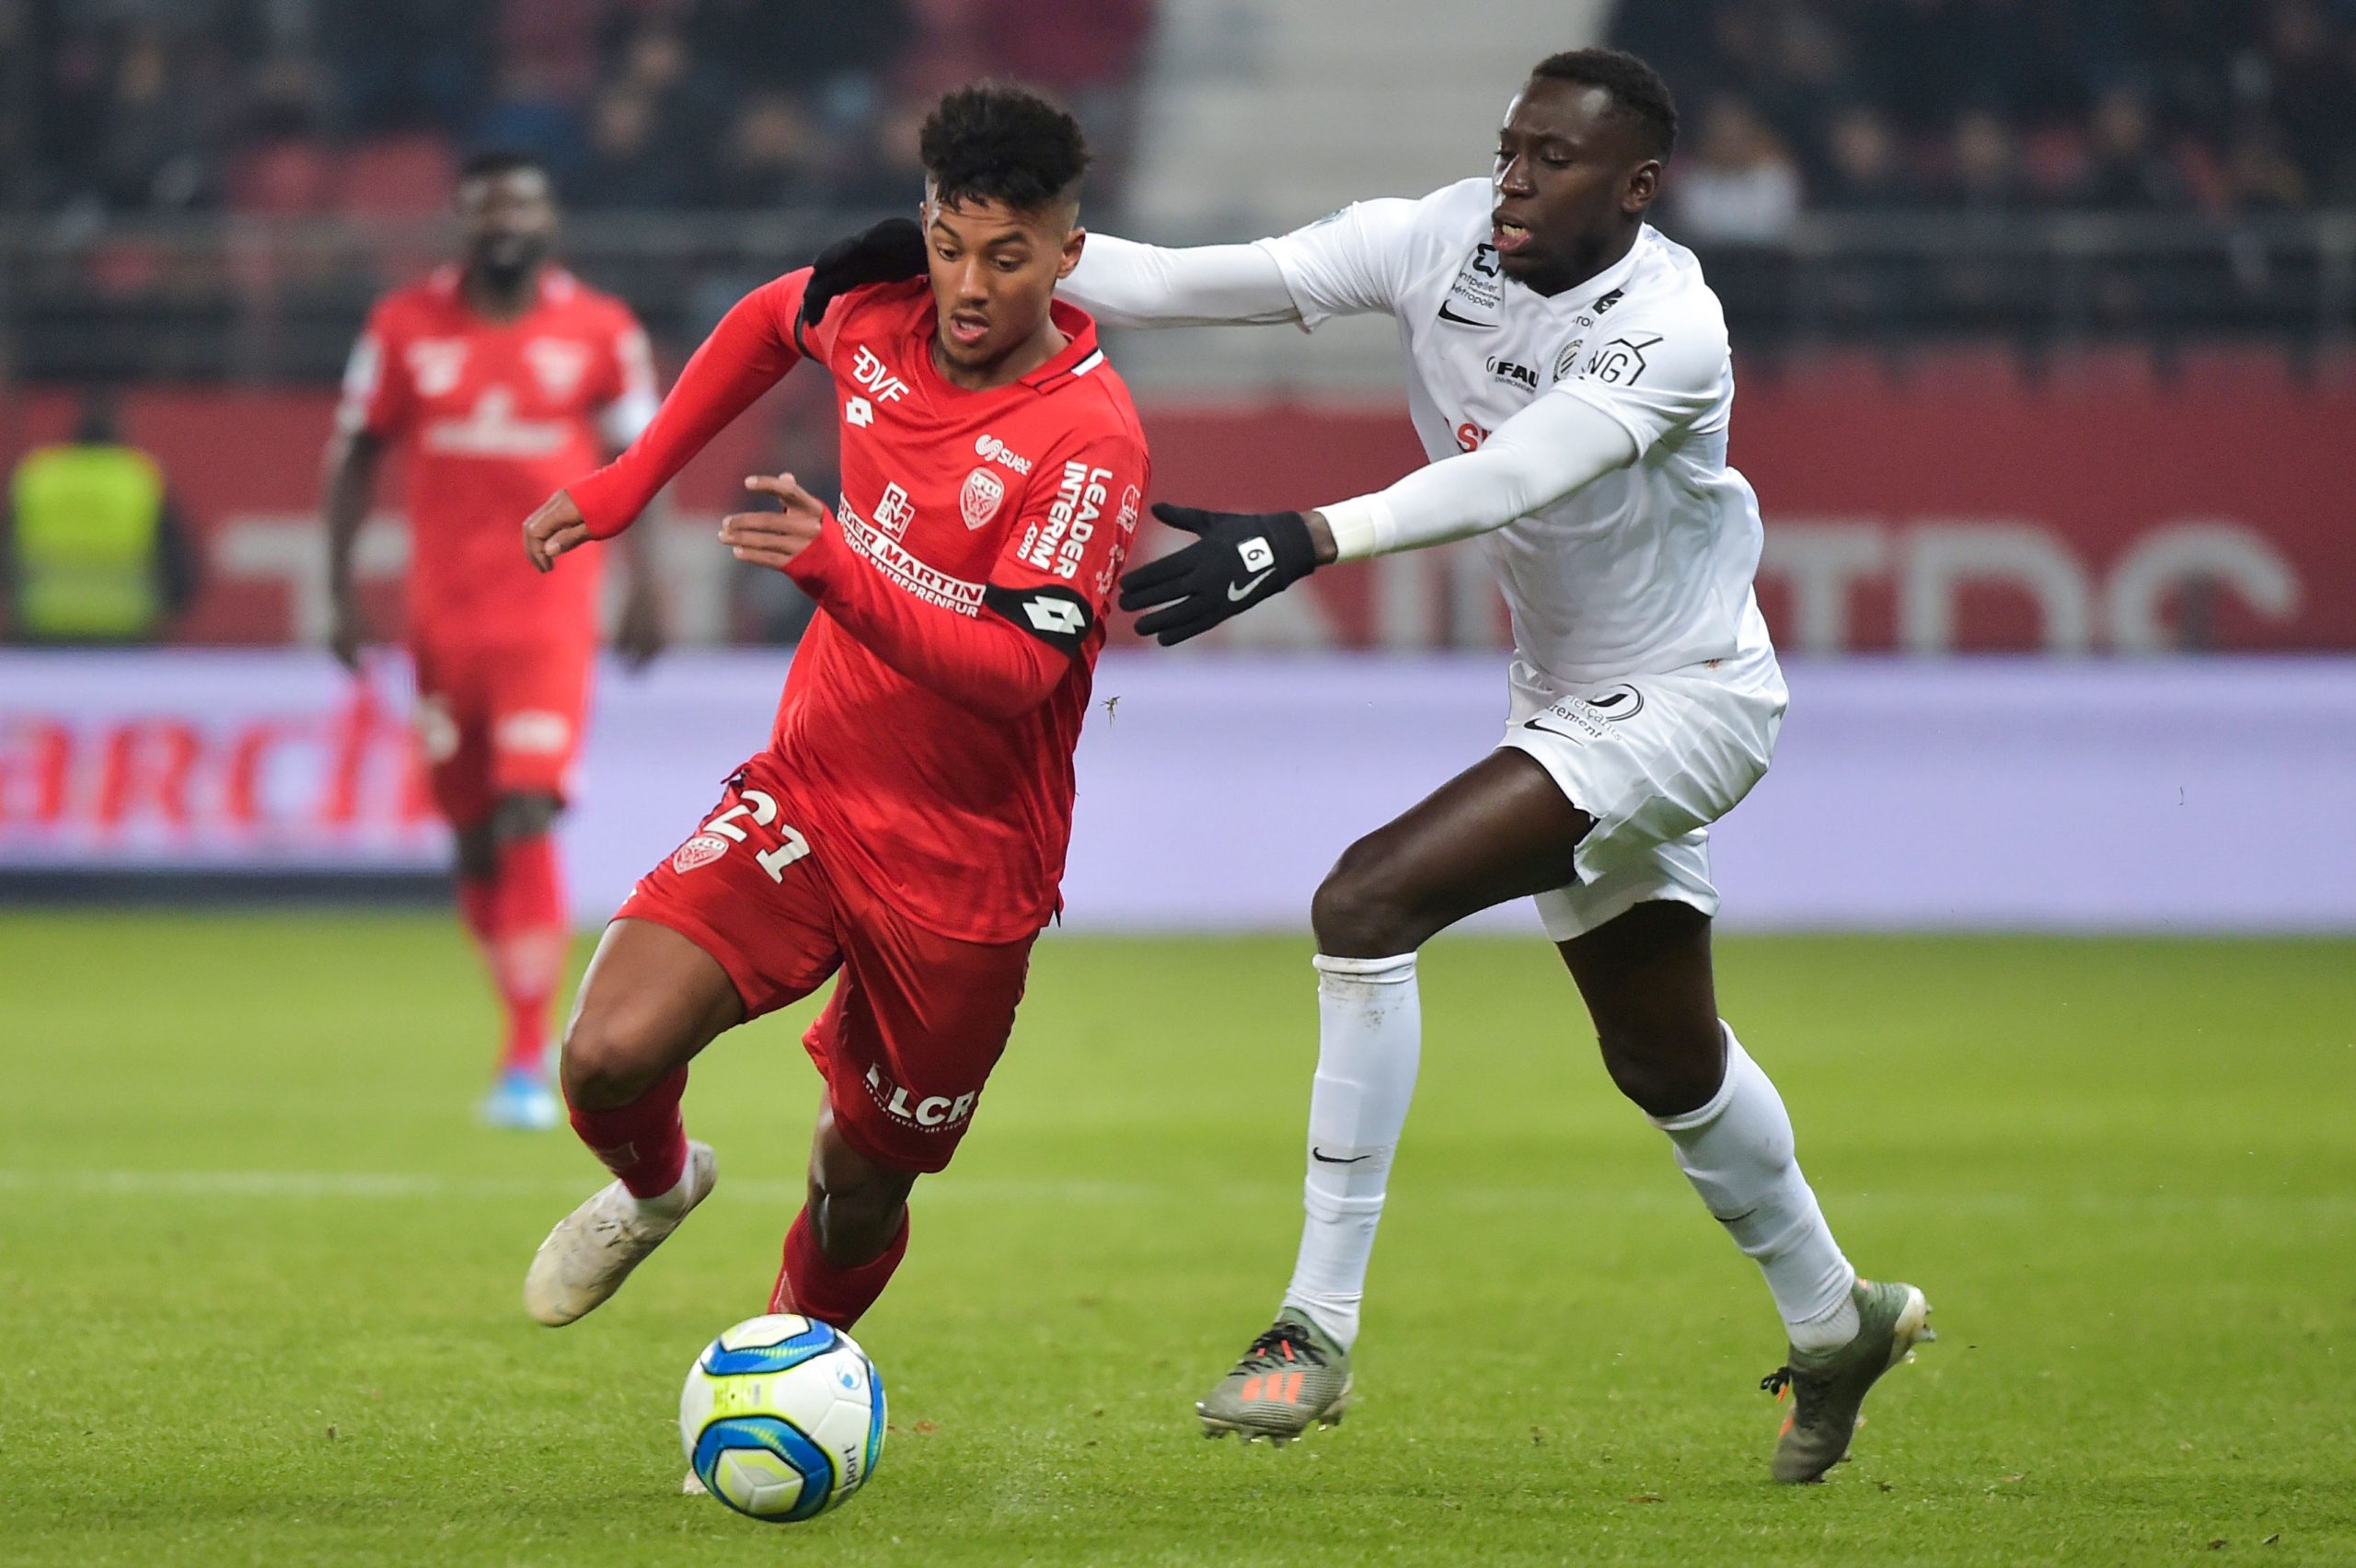 Mounir Chouiar (L) was one of the standout performers in Ligue 1 last season (Getty Images)